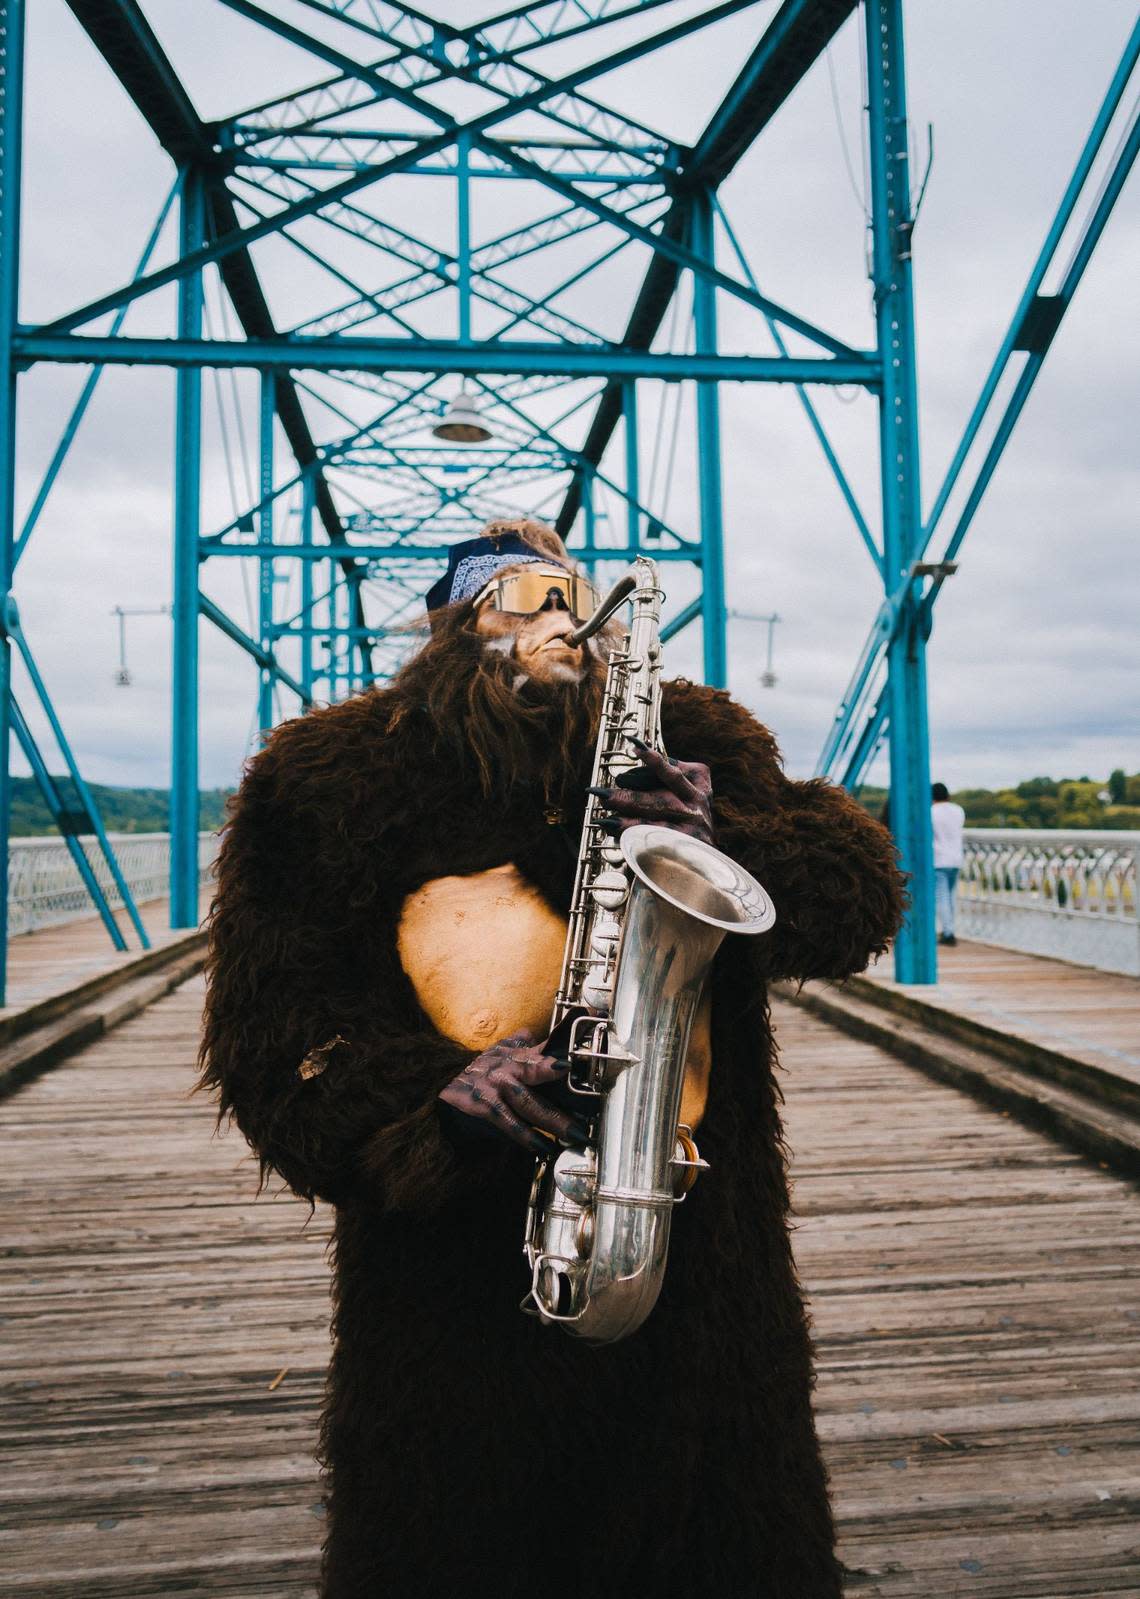 Saxsquatch, a Chapel Hill-based cryptid performer, has more than 1 million followers on TikTok and has gained national fame, but he hopes to help build a more nurturing local music scene.